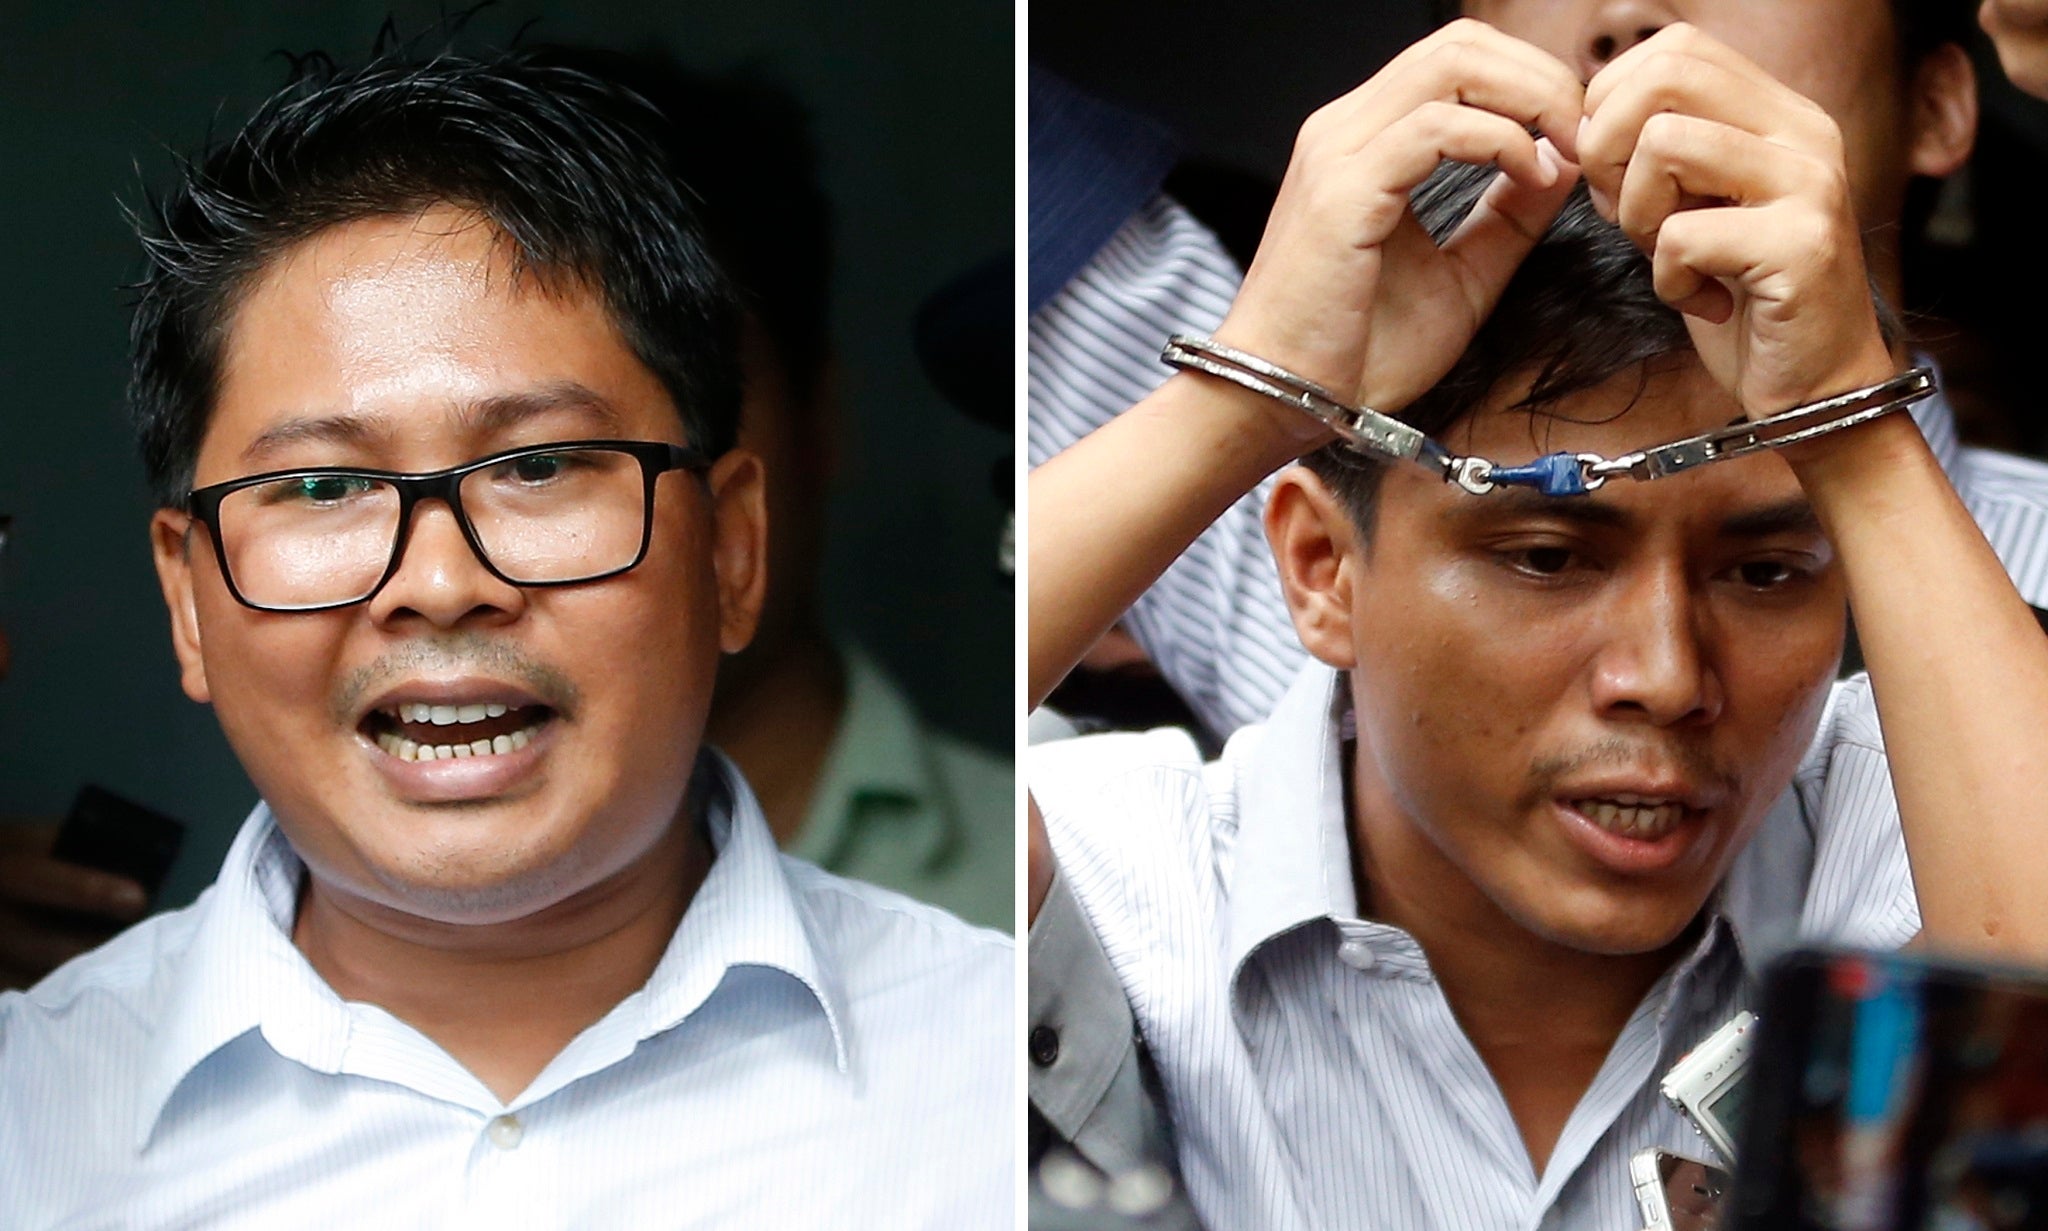 Kyaw Soe Oo and Wa Lone were jailed after uncovering evidence of extrajudicial killings (EPA)